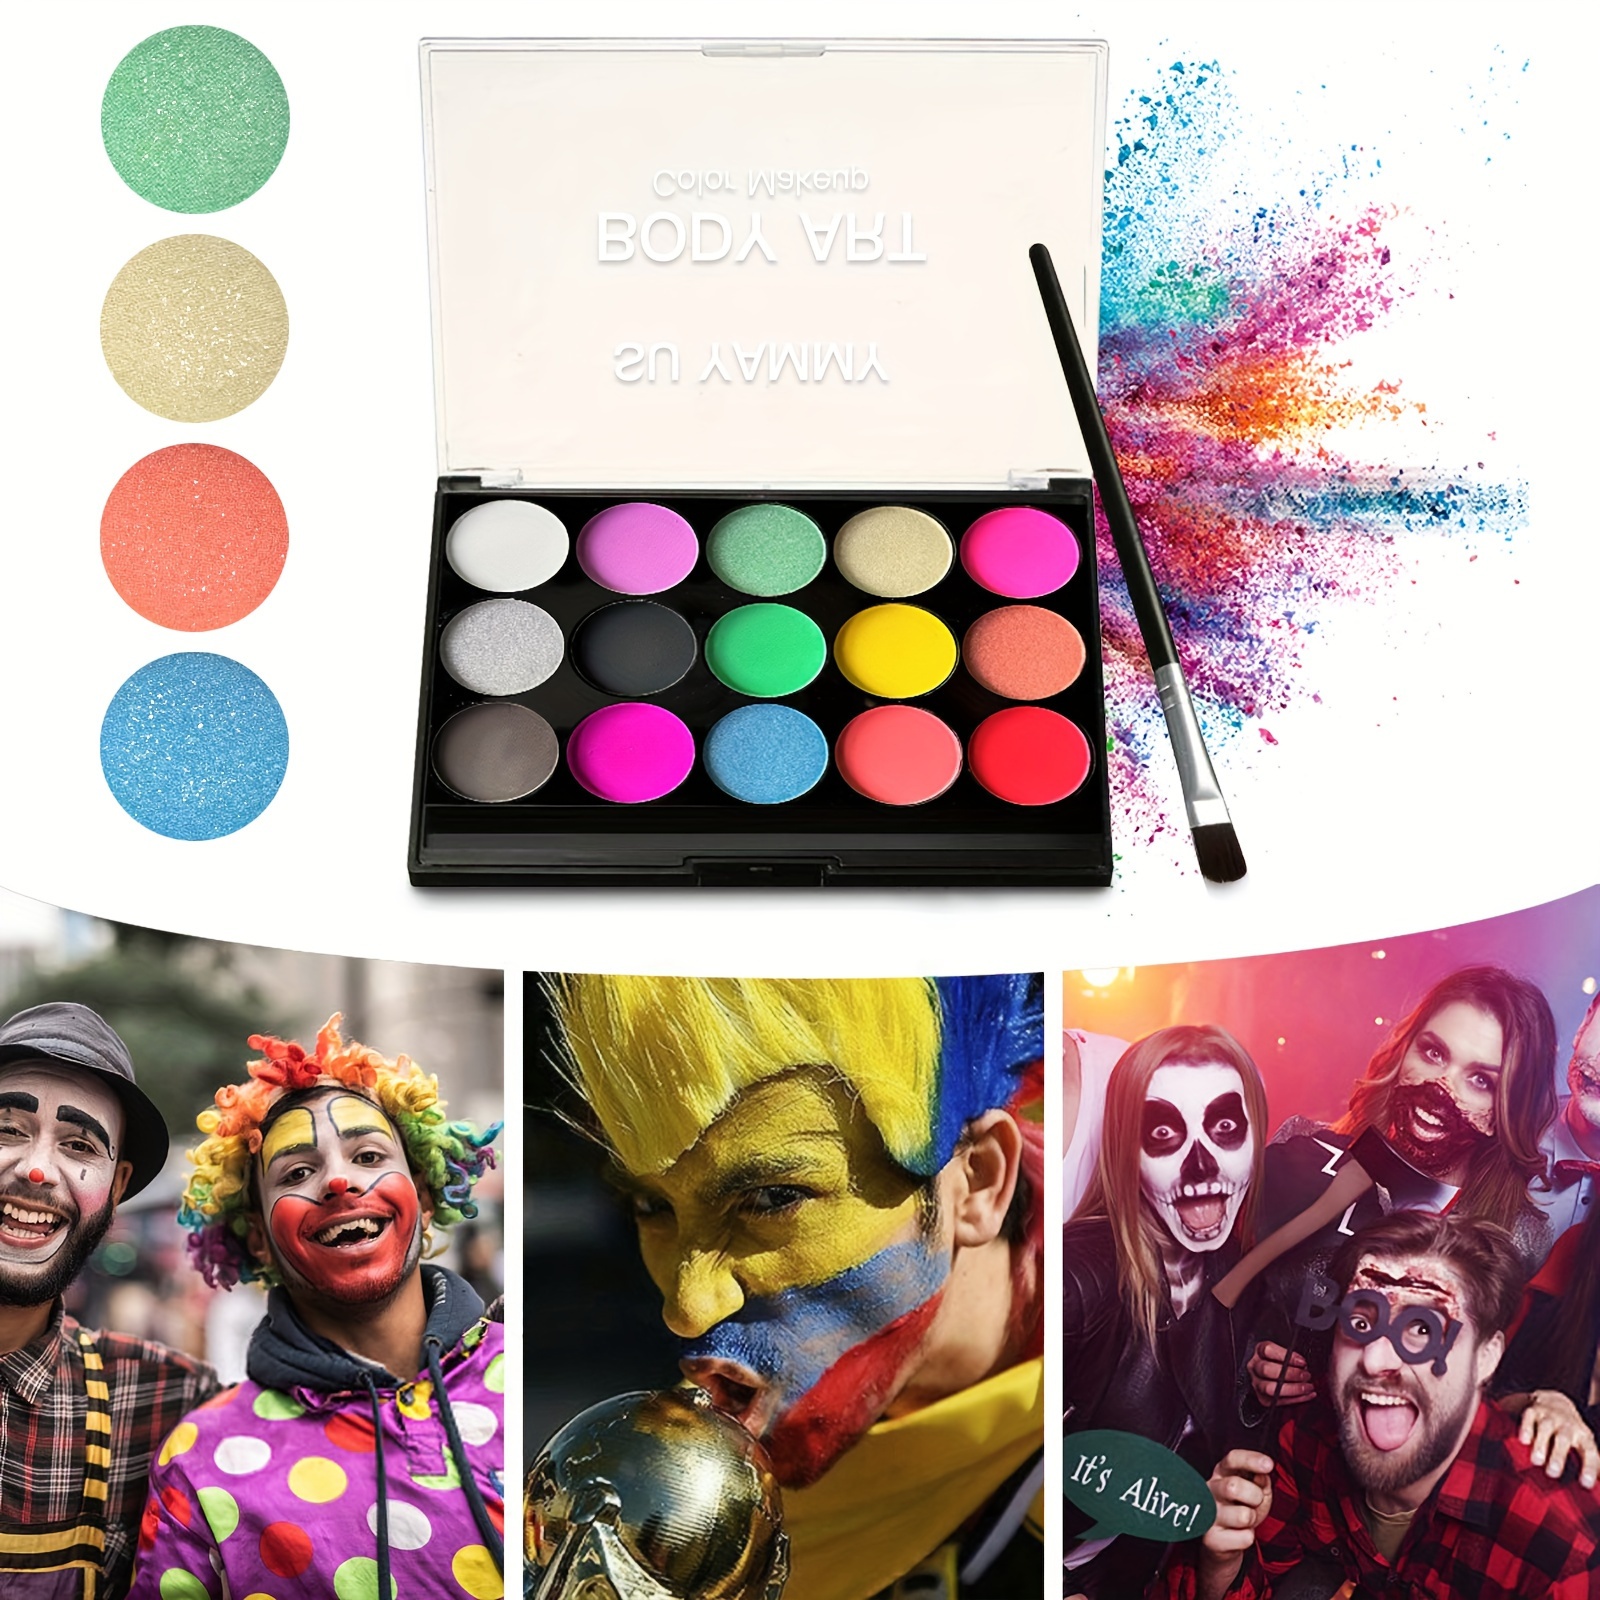 

Su Yammy 15-color Face & Body Paint Palette - Water-based, Non-toxic, Vibrant Shimmer Colors For Halloween, Cosplay, Parties, Theater & Stage